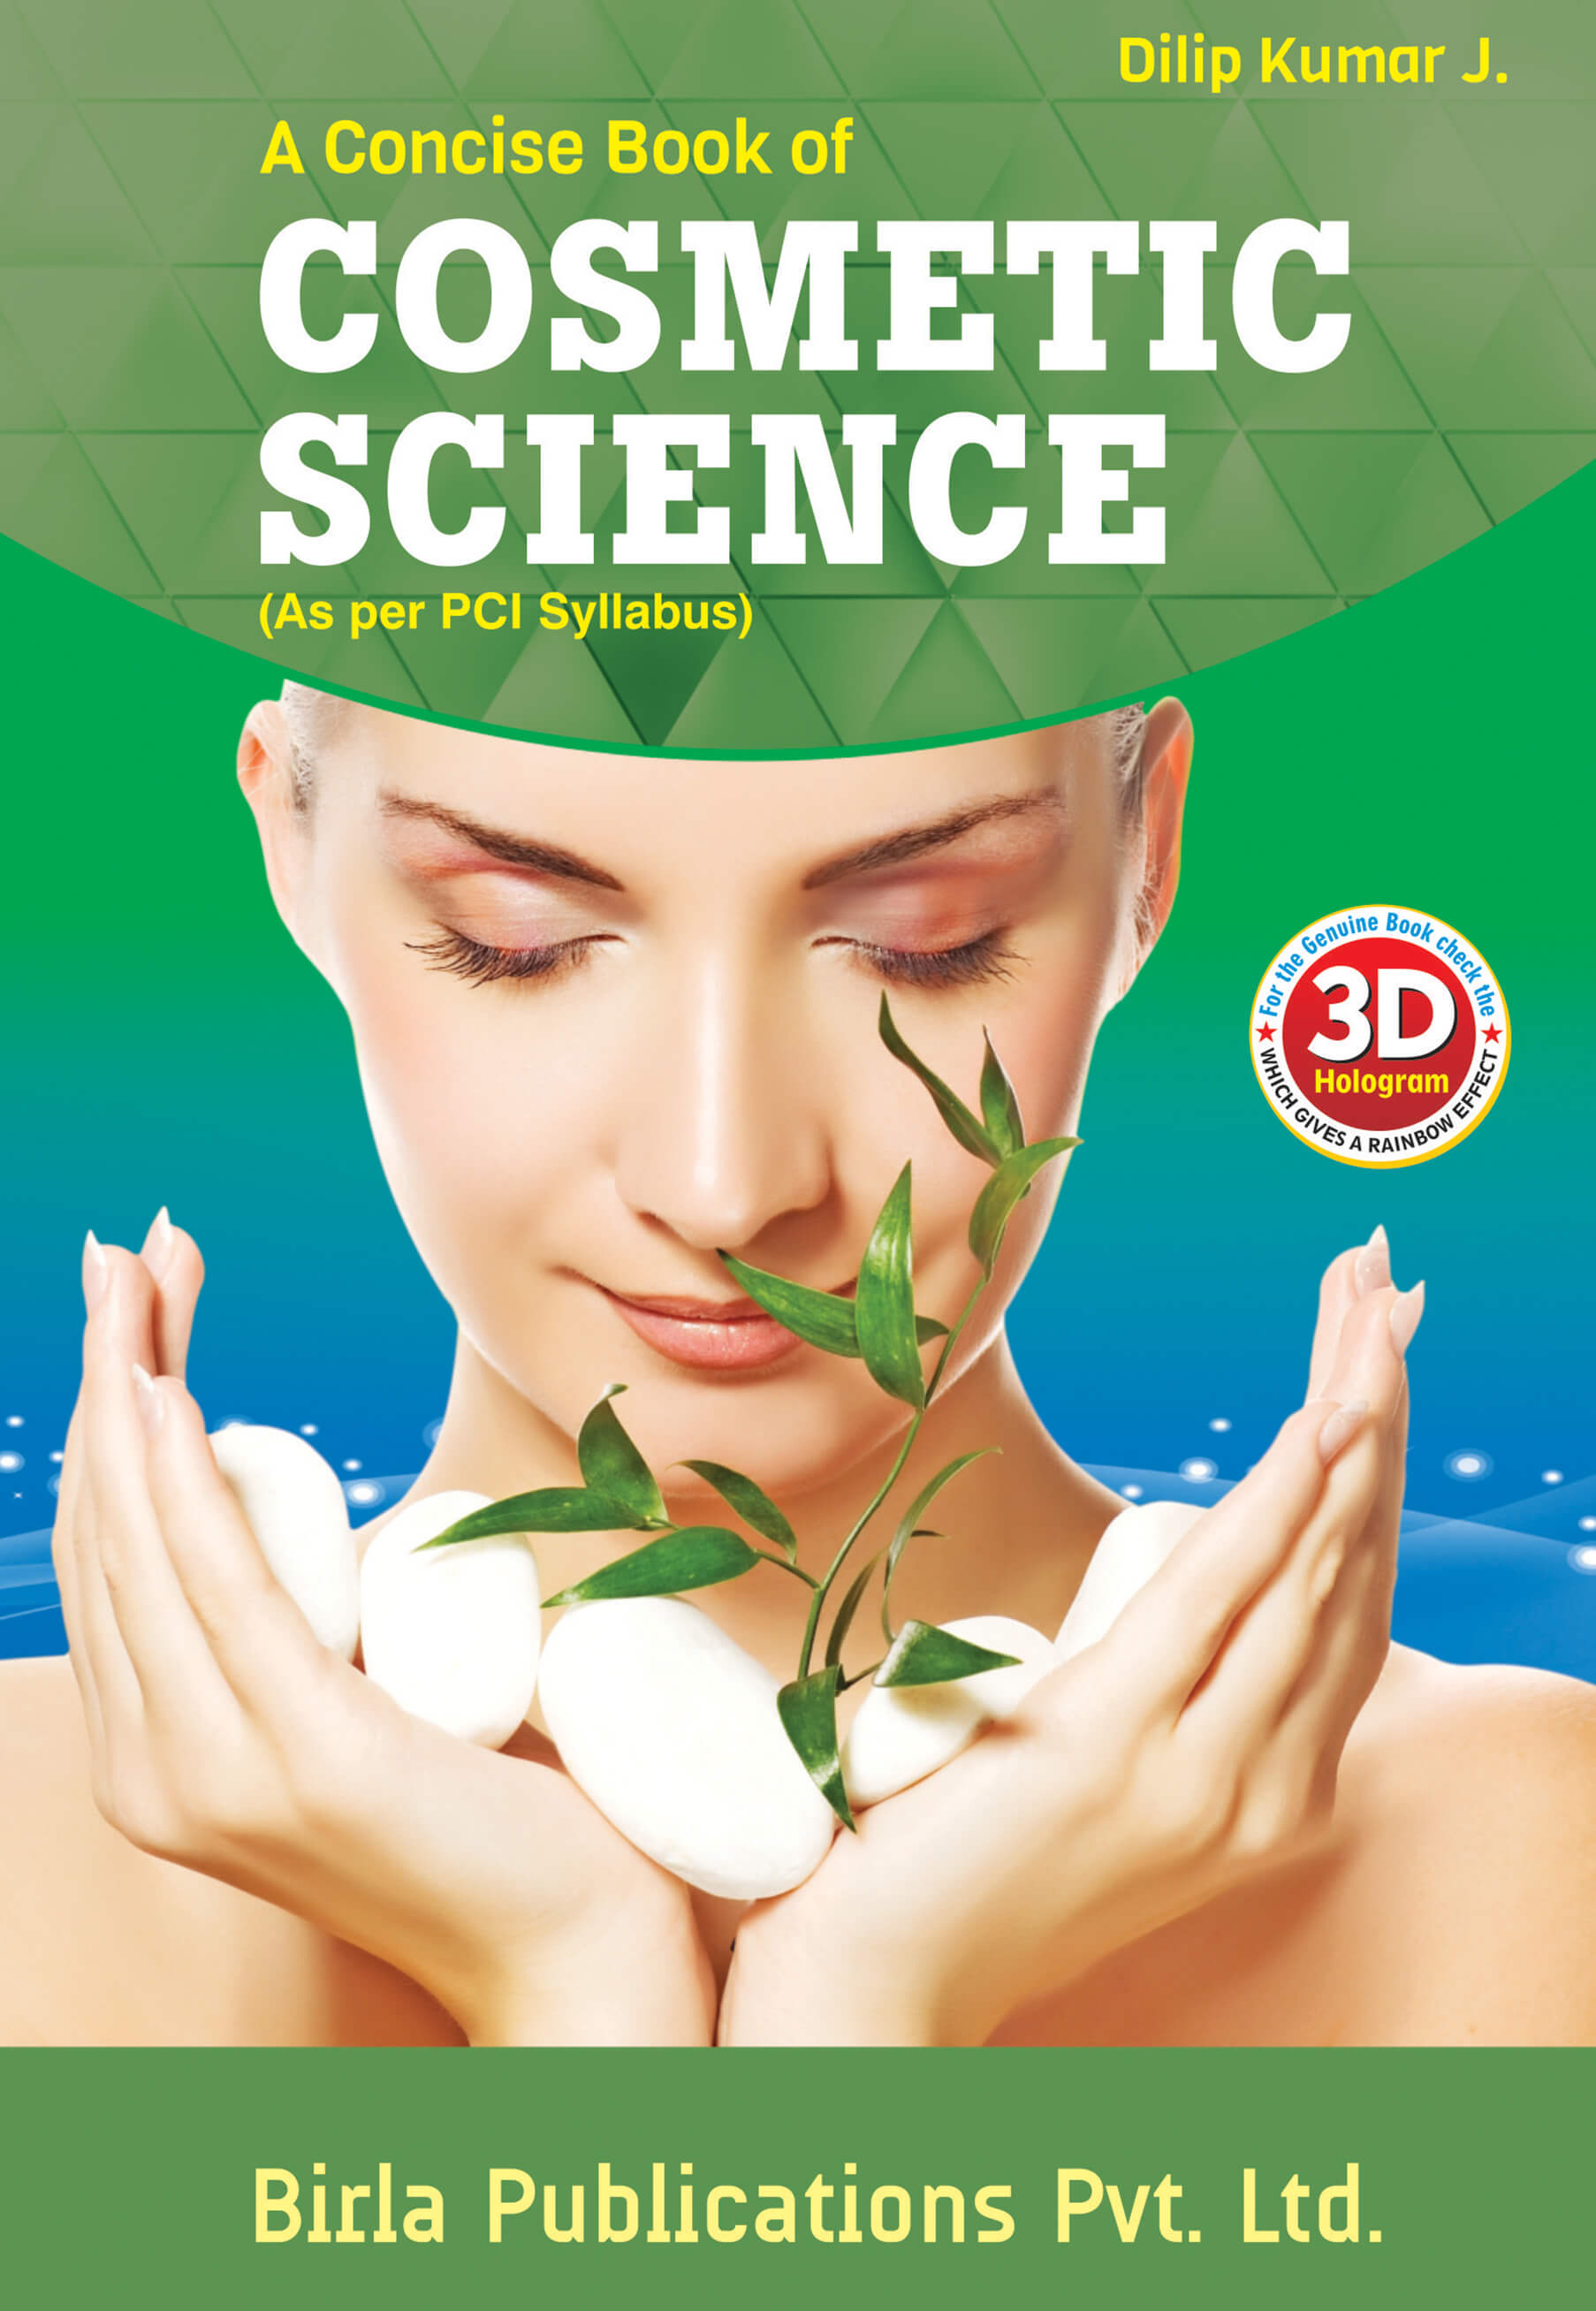 A CONCISE BOOK OF COSMETIC SCIENCE